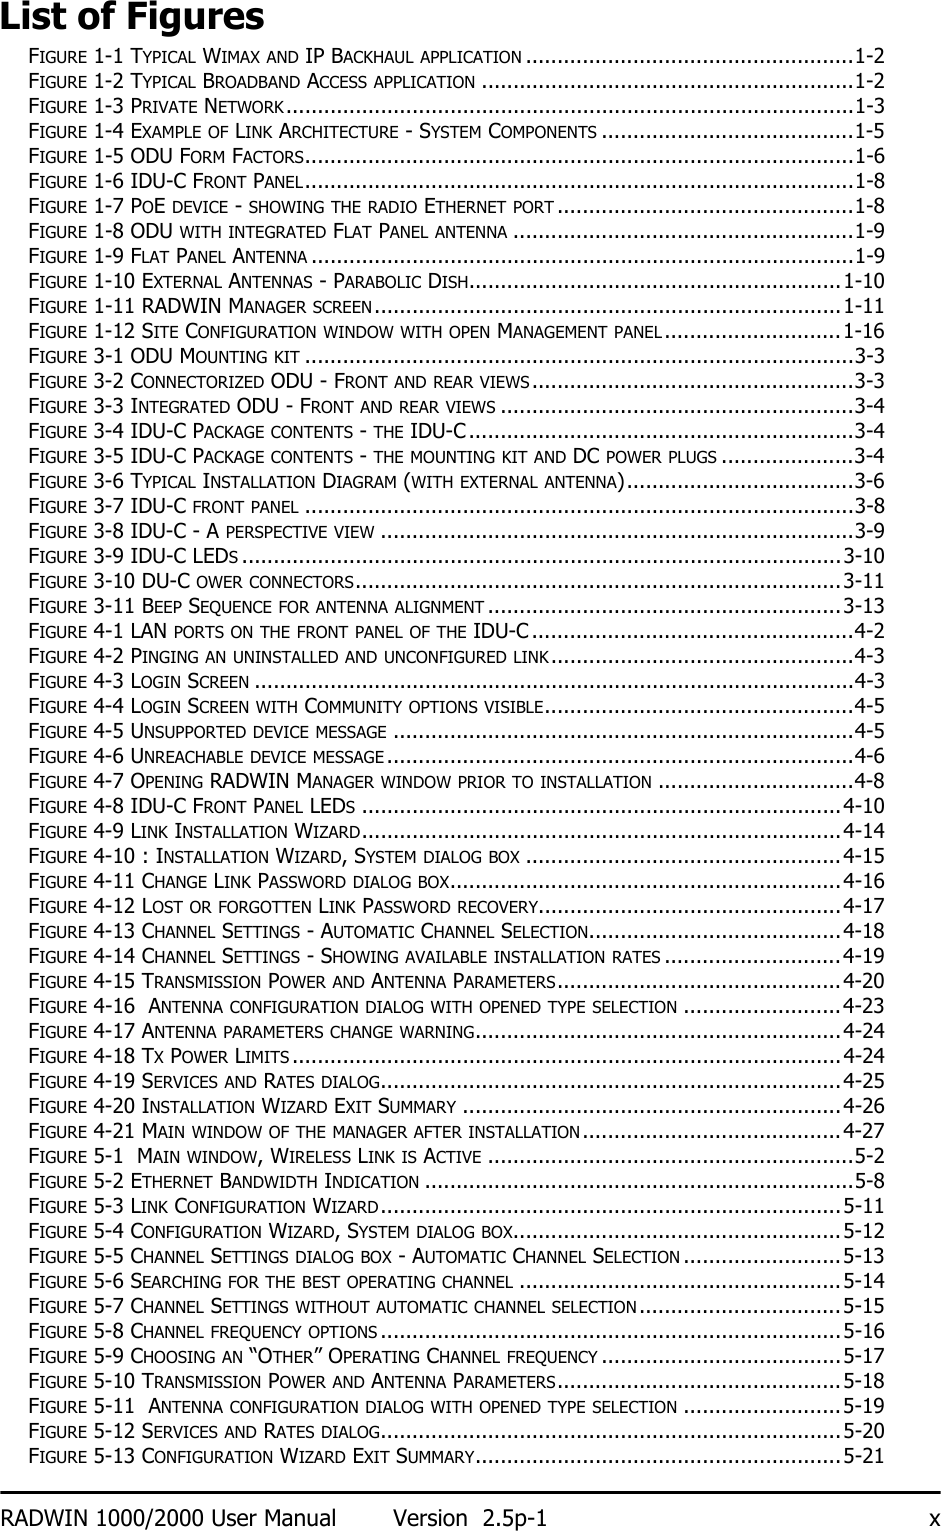 RADWIN 1000/2000 User Manual Version  2.5p-1 xList of FiguresFIGURE 1-1 TYPICAL WIMAX AND IP BACKHAUL APPLICATION ....................................................1-2FIGURE 1-2 TYPICAL BROADBAND ACCESS APPLICATION ...........................................................1-2FIGURE 1-3 PRIVATE NETWORK..........................................................................................1-3FIGURE 1-4 EXAMPLE OF LINK ARCHITECTURE - SYSTEM COMPONENTS ........................................1-5FIGURE 1-5 ODU FORM FACTORS.......................................................................................1-6FIGURE 1-6 IDU-C FRONT PANEL.......................................................................................1-8FIGURE 1-7 POE DEVICE - SHOWING THE RADIO ETHERNET PORT ...............................................1-8FIGURE 1-8 ODU WITH INTEGRATED FLAT PANEL ANTENNA ......................................................1-9FIGURE 1-9 FLAT PANEL ANTENNA ......................................................................................1-9FIGURE 1-10 EXTERNAL ANTENNAS - PARABOLIC DISH...........................................................1-10FIGURE 1-11 RADWIN MANAGER SCREEN..........................................................................1-11FIGURE 1-12 SITE CONFIGURATION WINDOW WITH OPEN MANAGEMENT PANEL............................1-16FIGURE 3-1 ODU MOUNTING KIT .......................................................................................3-3FIGURE 3-2 CONNECTORIZED ODU - FRONT AND REAR VIEWS...................................................3-3FIGURE 3-3 INTEGRATED ODU - FRONT AND REAR VIEWS ........................................................3-4FIGURE 3-4 IDU-C PACKAGE CONTENTS - THE IDU-C .............................................................3-4FIGURE 3-5 IDU-C PACKAGE CONTENTS - THE MOUNTING KIT AND DC POWER PLUGS .....................3-4FIGURE 3-6 TYPICAL INSTALLATION DIAGRAM (WITH EXTERNAL ANTENNA)....................................3-6FIGURE 3-7 IDU-C FRONT PANEL .......................................................................................3-8FIGURE 3-8 IDU-C - A PERSPECTIVE VIEW ...........................................................................3-9FIGURE 3-9 IDU-C LEDS...............................................................................................3-10FIGURE 3-10 DU-C OWER CONNECTORS.............................................................................3-11FIGURE 3-11 BEEP SEQUENCE FOR ANTENNA ALIGNMENT ........................................................3-13FIGURE 4-1 LAN PORTS ON THE FRONT PANEL OF THE IDU-C ...................................................4-2FIGURE 4-2 PINGING AN UNINSTALLED AND UNCONFIGURED LINK................................................4-3FIGURE 4-3 LOGIN SCREEN ...............................................................................................4-3FIGURE 4-4 LOGIN SCREEN WITH COMMUNITY OPTIONS VISIBLE.................................................4-5FIGURE 4-5 UNSUPPORTED DEVICE MESSAGE .........................................................................4-5FIGURE 4-6 UNREACHABLE DEVICE MESSAGE ..........................................................................4-6FIGURE 4-7 OPENING RADWIN MANAGER WINDOW PRIOR TO INSTALLATION ...............................4-8FIGURE 4-8 IDU-C FRONT PANEL LEDS............................................................................4-10FIGURE 4-9 LINK INSTALLATION WIZARD............................................................................4-14FIGURE 4-10 : INSTALLATION WIZARD, SYSTEM DIALOG BOX ..................................................4-15FIGURE 4-11 CHANGE LINK PASSWORD DIALOG BOX..............................................................4-16FIGURE 4-12 LOST OR FORGOTTEN LINK PASSWORD RECOVERY................................................4-17FIGURE 4-13 CHANNEL SETTINGS - AUTOMATIC CHANNEL SELECTION........................................4-18FIGURE 4-14 CHANNEL SETTINGS - SHOWING AVAILABLE INSTALLATION RATES ............................4-19FIGURE 4-15 TRANSMISSION POWER AND ANTENNA PARAMETERS.............................................4-20FIGURE 4-16  ANTENNA CONFIGURATION DIALOG WITH OPENED TYPE SELECTION .........................4-23FIGURE 4-17 ANTENNA PARAMETERS CHANGE WARNING..........................................................4-24FIGURE 4-18 TX POWER LIMITS .......................................................................................4-24FIGURE 4-19 SERVICES AND RATES DIALOG.........................................................................4-25FIGURE 4-20 INSTALLATION WIZARD EXIT SUMMARY ............................................................4-26FIGURE 4-21 MAIN WINDOW OF THE MANAGER AFTER INSTALLATION.........................................4-27FIGURE 5-1  MAIN WINDOW, WIRELESS LINK IS ACTIVE ..........................................................5-2FIGURE 5-2 ETHERNET BANDWIDTH INDICATION ....................................................................5-8FIGURE 5-3 LINK CONFIGURATION WIZARD.........................................................................5-11FIGURE 5-4 CONFIGURATION WIZARD, SYSTEM DIALOG BOX....................................................5-12FIGURE 5-5 CHANNEL SETTINGS DIALOG BOX - AUTOMATIC CHANNEL SELECTION .........................5-13FIGURE 5-6 SEARCHING FOR THE BEST OPERATING CHANNEL ...................................................5-14FIGURE 5-7 CHANNEL SETTINGS WITHOUT AUTOMATIC CHANNEL SELECTION................................5-15FIGURE 5-8 CHANNEL FREQUENCY OPTIONS .........................................................................5-16FIGURE 5-9 CHOOSING AN “OTHER” OPERATING CHANNEL FREQUENCY ......................................5-17FIGURE 5-10 TRANSMISSION POWER AND ANTENNA PARAMETERS.............................................5-18FIGURE 5-11  ANTENNA CONFIGURATION DIALOG WITH OPENED TYPE SELECTION .........................5-19FIGURE 5-12 SERVICES AND RATES DIALOG.........................................................................5-20FIGURE 5-13 CONFIGURATION WIZARD EXIT SUMMARY..........................................................5-21